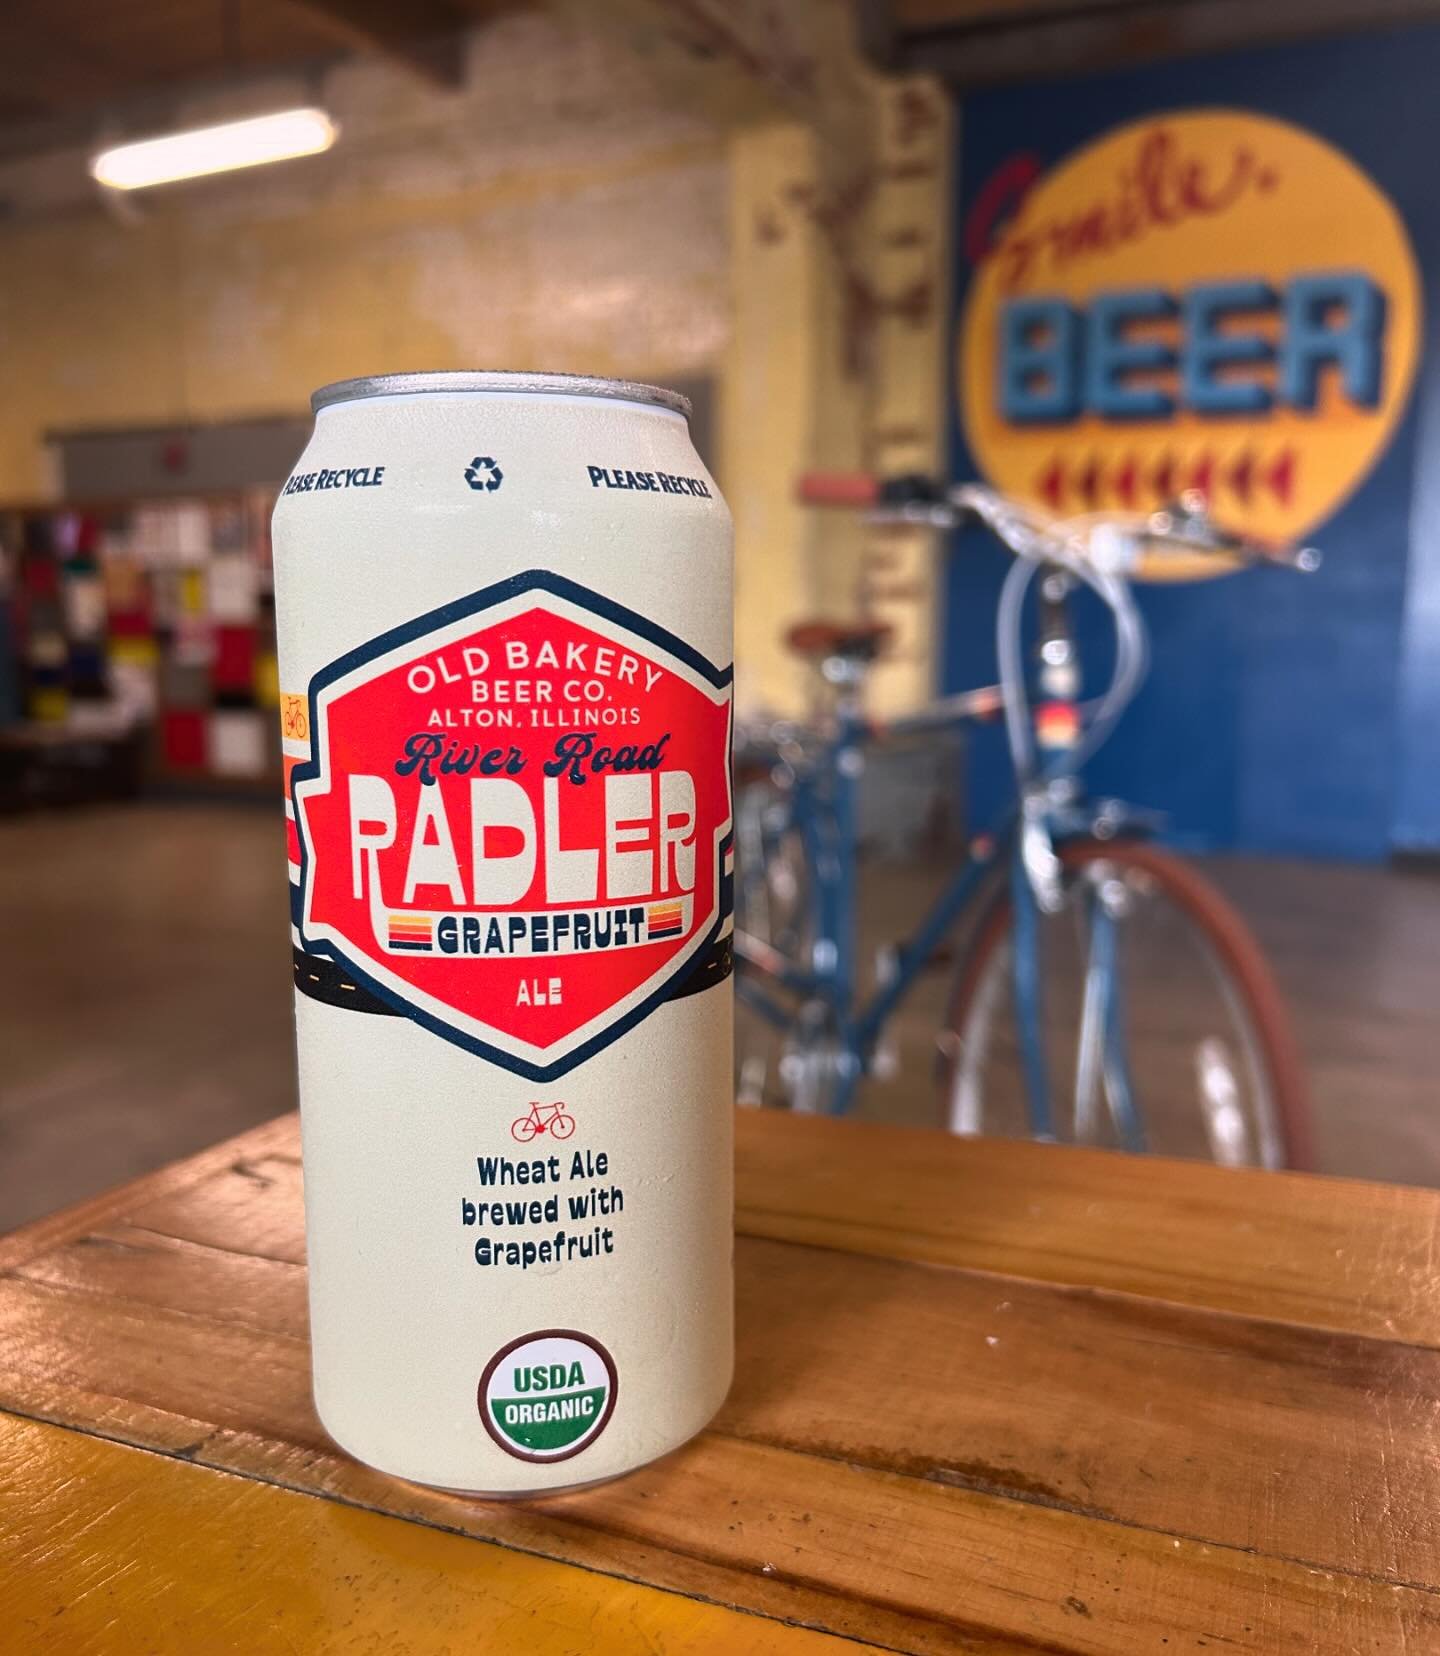 Your first chance to enter the raffle to win a custom OBB bicycle is tonight at @saintlouishopshop !  Join us from 5-7 to try our River Road Radler and throw your name in the hat for some great prizes!

Our delicious new River Road Radler was brewed 